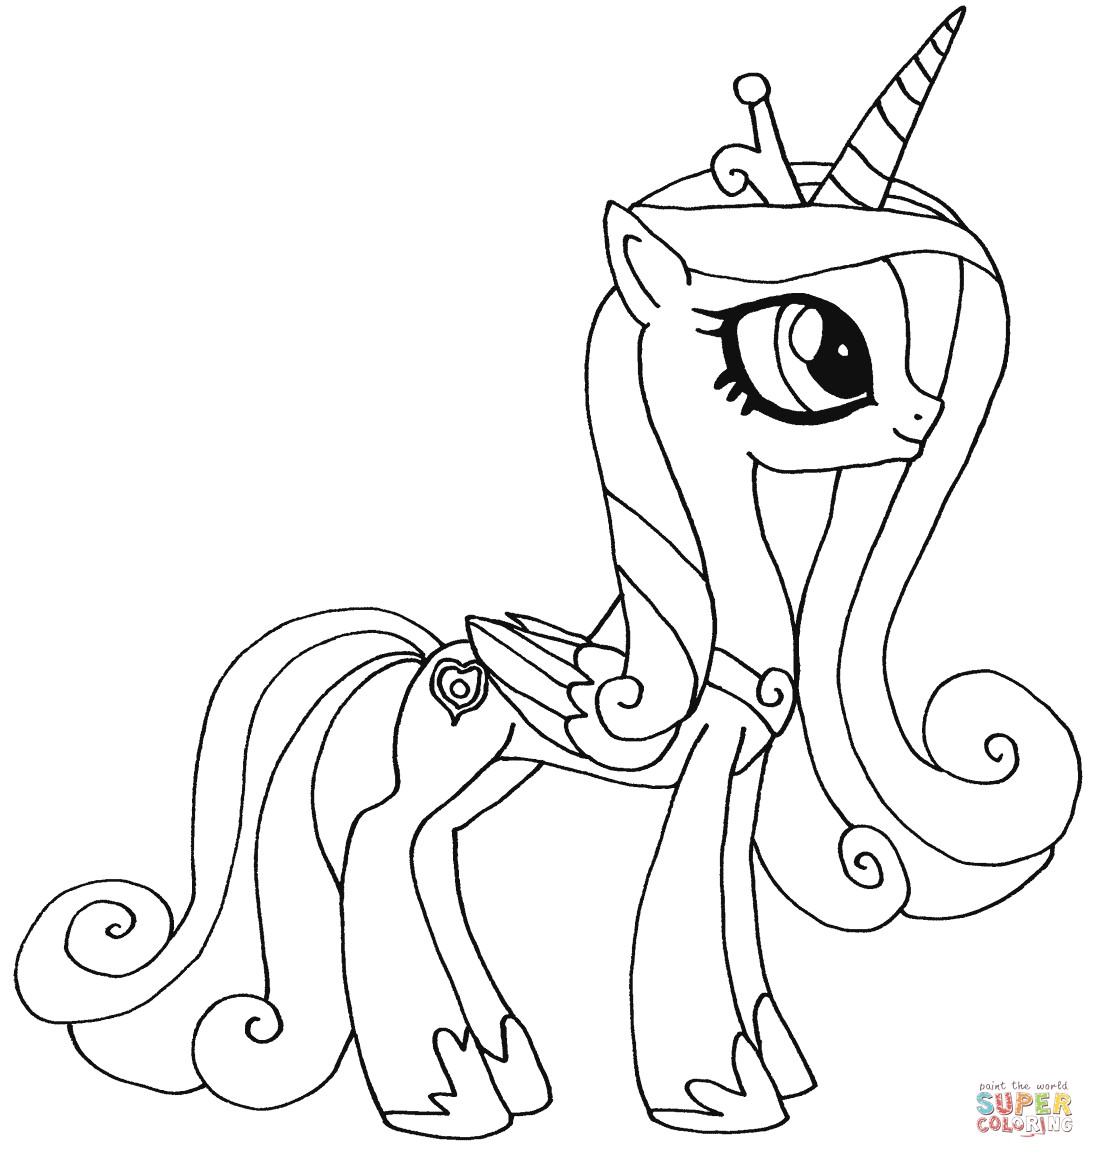 Princess My Little Pony Coloring Page Wallpaper